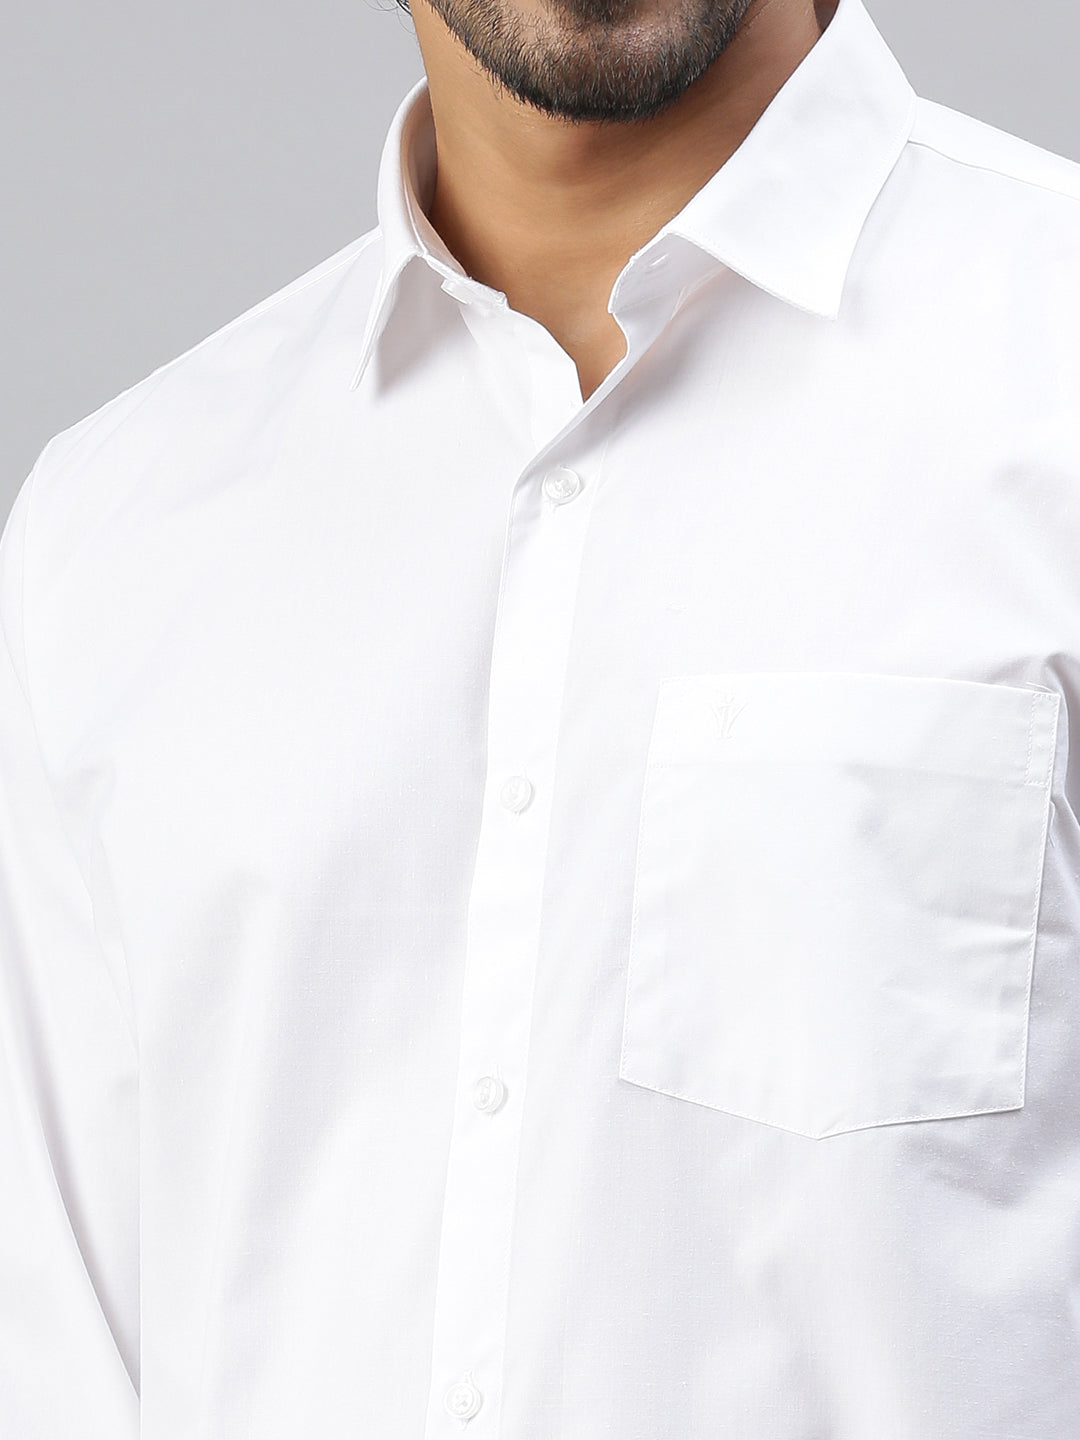 Mens Wrinkle Free White Shirt Full Sleeves Soft Touch -Zoom view